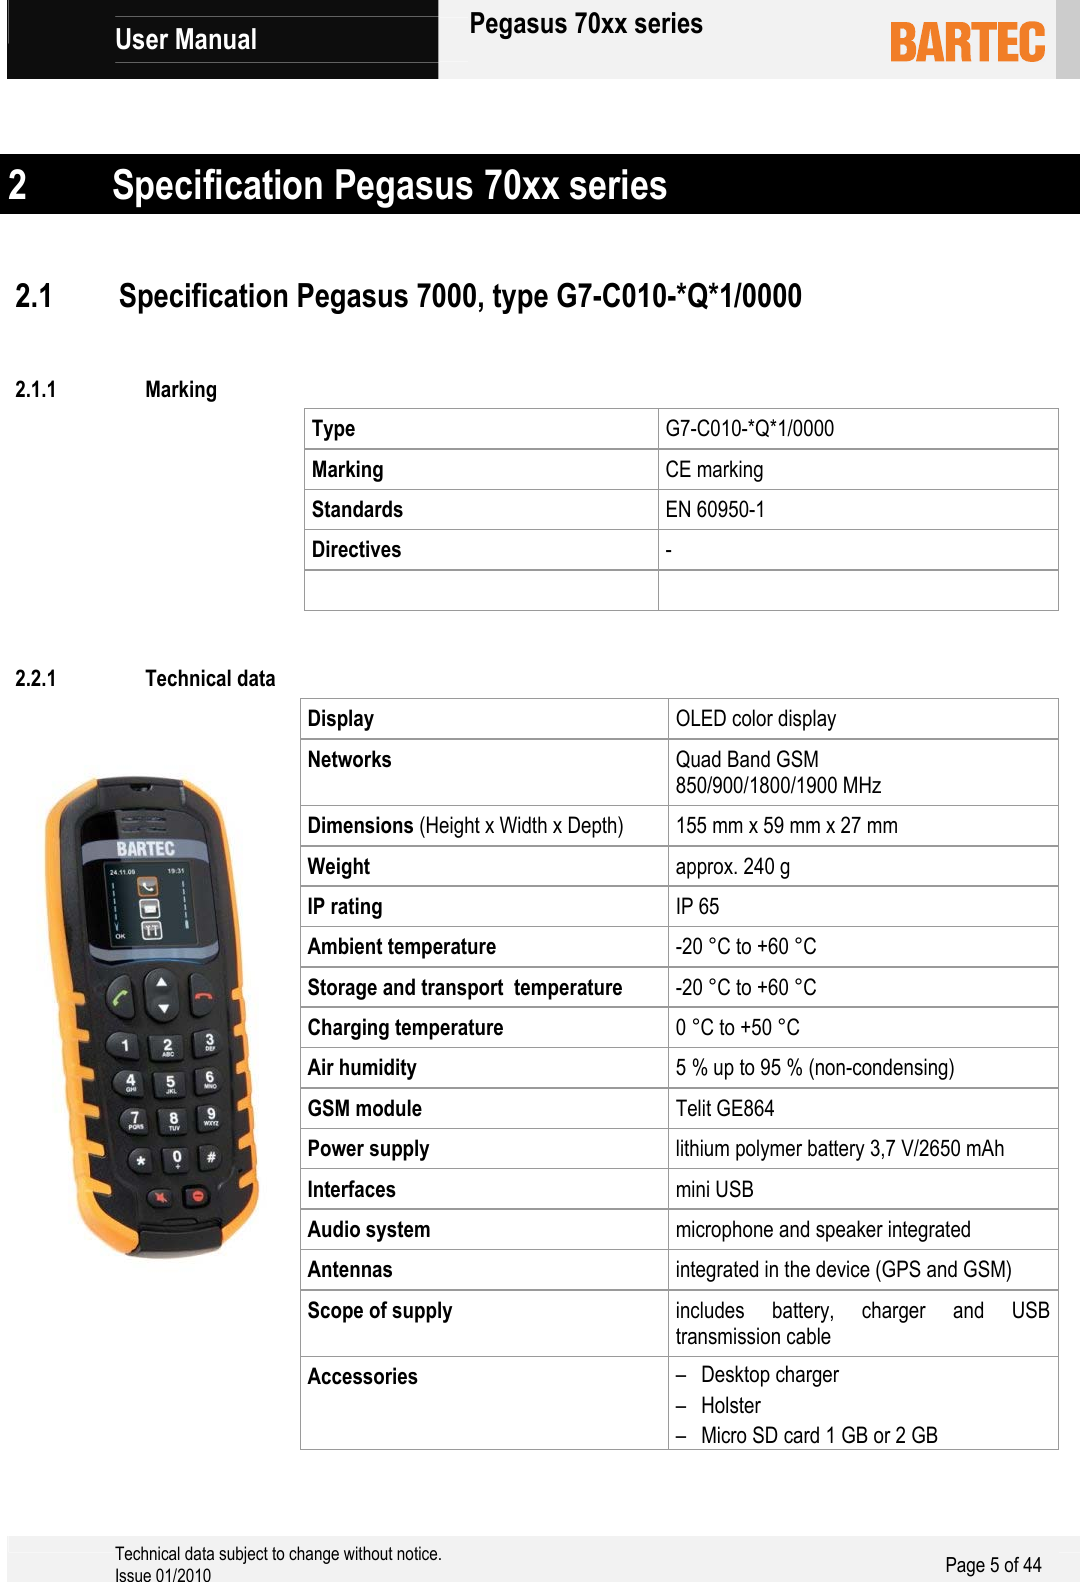             User Manual   Pegasus 70xx series     Technical data subject to change without notice. Issue 01/2010  Page 5 of 44    2 Specification Pegasus 70xx series   2.1 Specification Pegasus 7000, type G7-C010-*Q*1/0000  2.1.1 Marking Type  G7-C010-*Q*1/0000 Marking  CE marking Standards  EN 60950-1 Directives  -   2.2.1 Technical data Display  OLED color display Networks  Quad Band GSM  850/900/1800/1900 MHz Dimensions (Height x Width x Depth) 155 mm x 59 mm x 27 mm Weight  approx. 240 g IP rating IP 65 Ambient temperature  -20 °C to +60 °C Storage and transport  temperature  -20 °C to +60 °C Charging temperature  0 °C to +50 °C Air humidity  5 % up to 95 % (non-condensing) GSM module  Telit GE864 Power supply  lithium polymer battery 3,7 V/2650 mAh Interfaces  mini USB Audio system  microphone and speaker integrated Antennas  integrated in the device (GPS and GSM) Scope of supply  includes battery, charger and USB transmission cable Accessories  – Desktop charger – Holster – Micro SD card 1 GB or 2 GB 